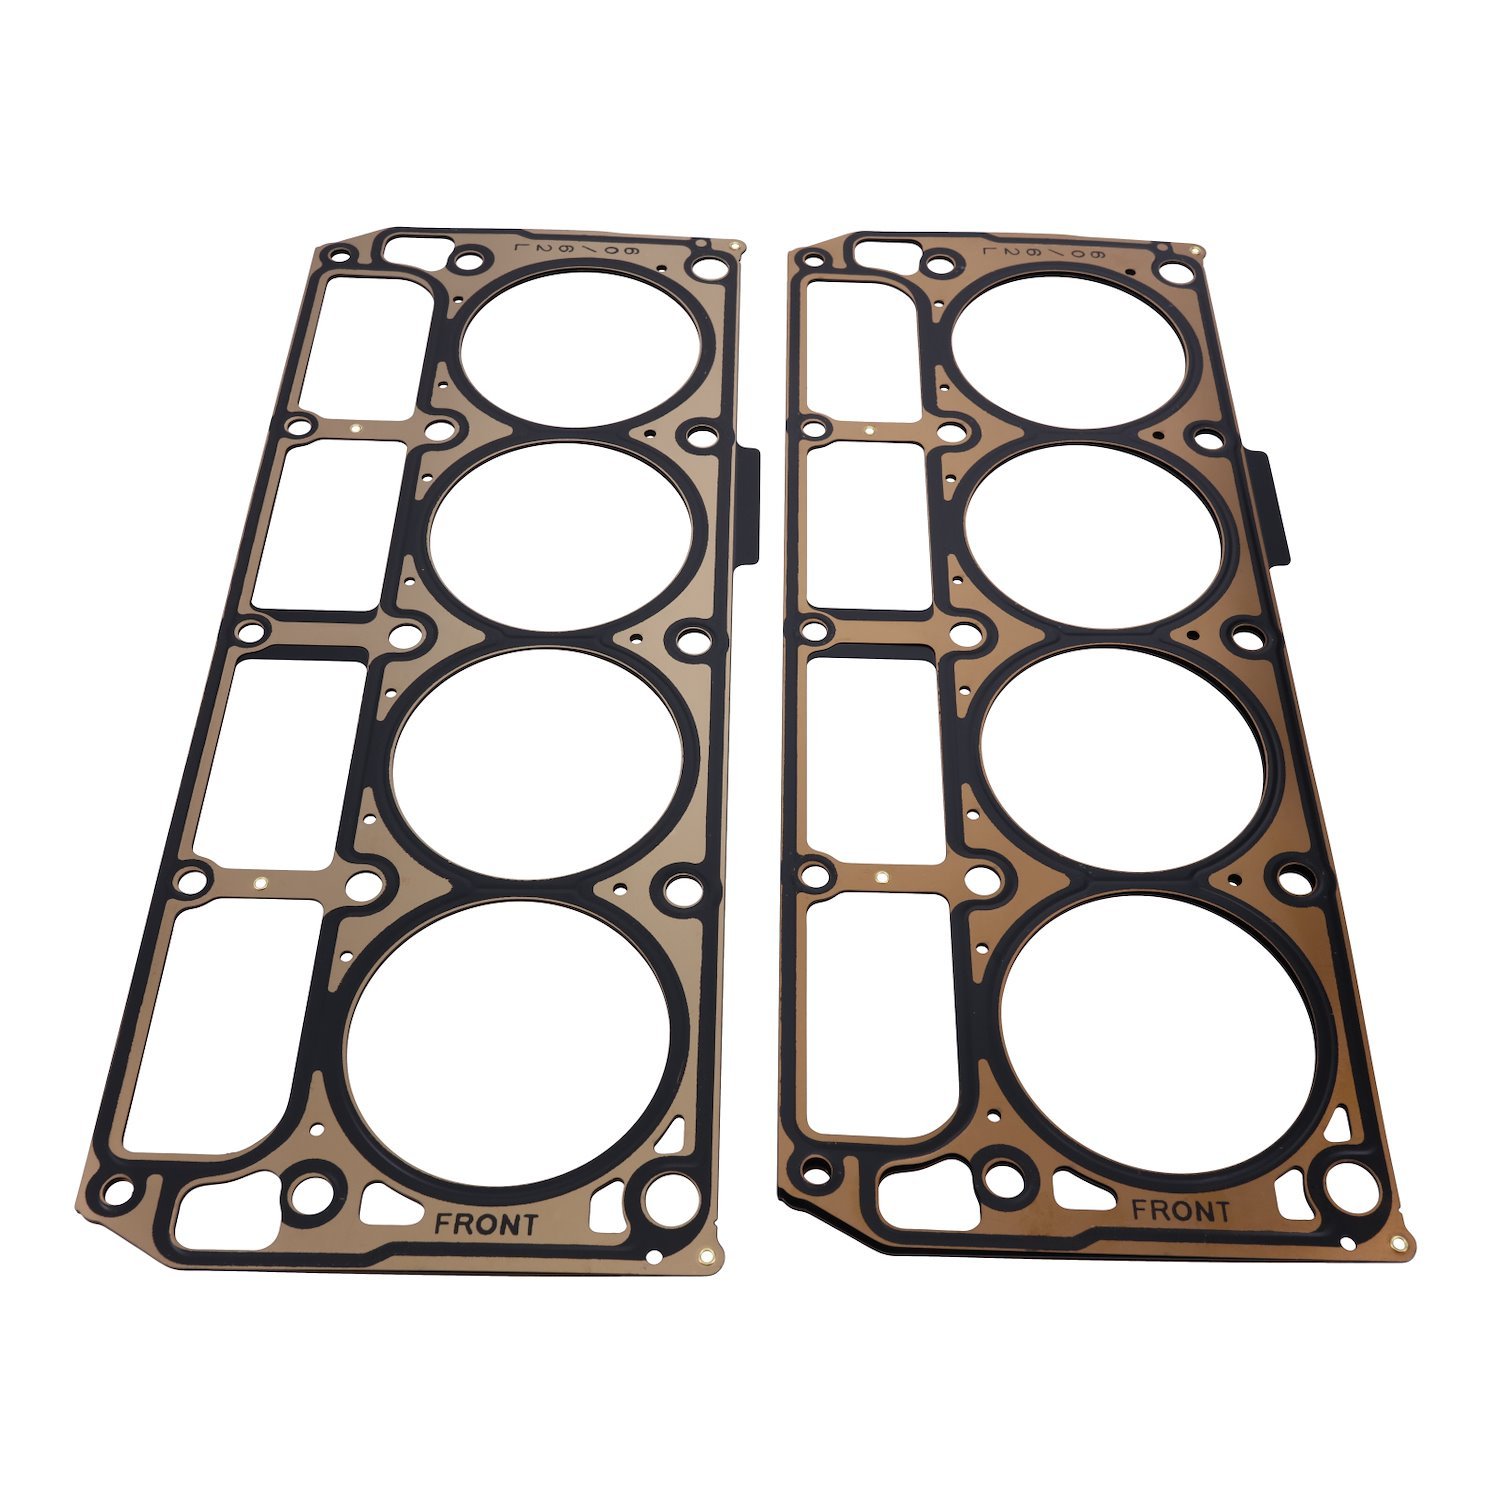 GK012 LS2, LS3, L92 Cylinder Head Gaskets, Steel and Rubber